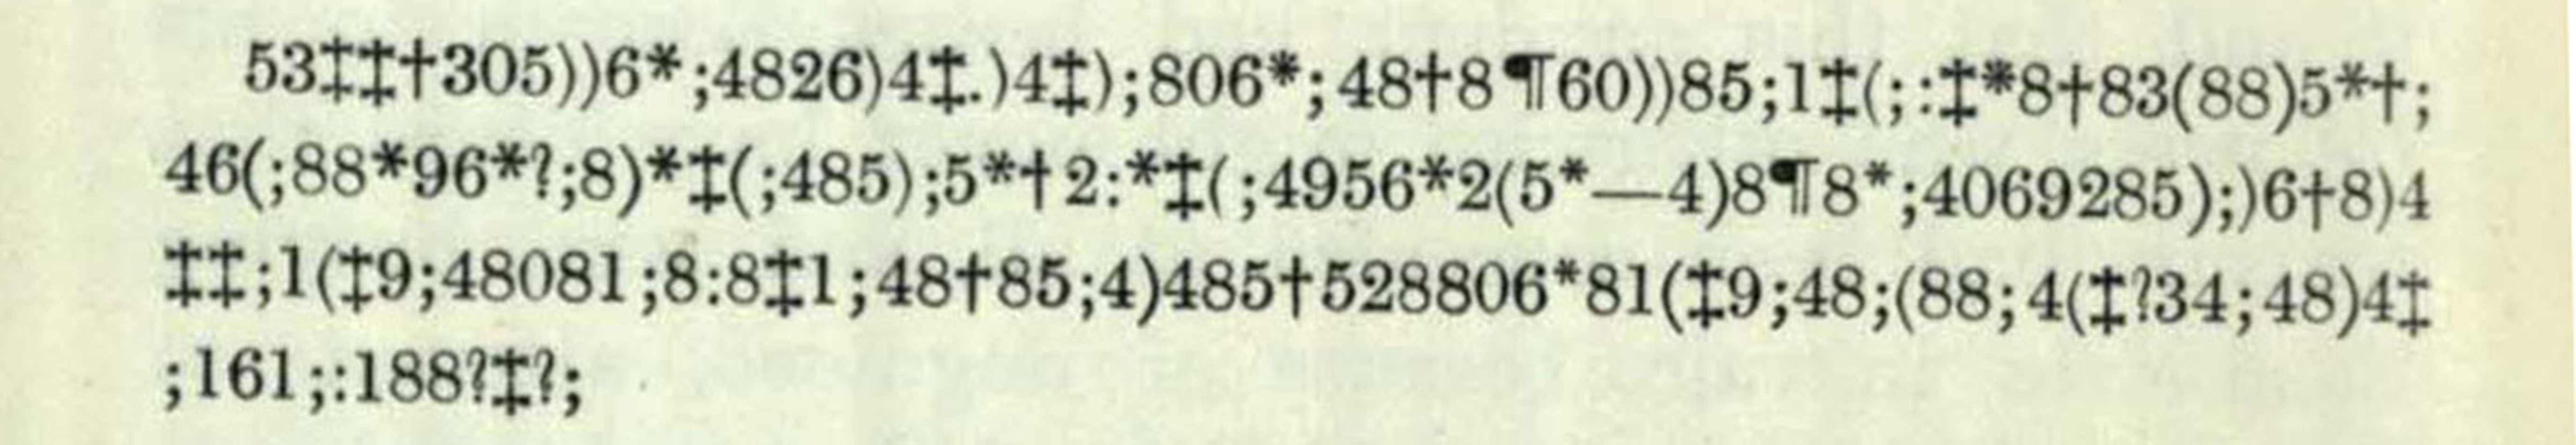 William Legrand’s cipher. Excerpt from page 134 of Tales of Romance and Fantasy (s PS 2612.T2R7).